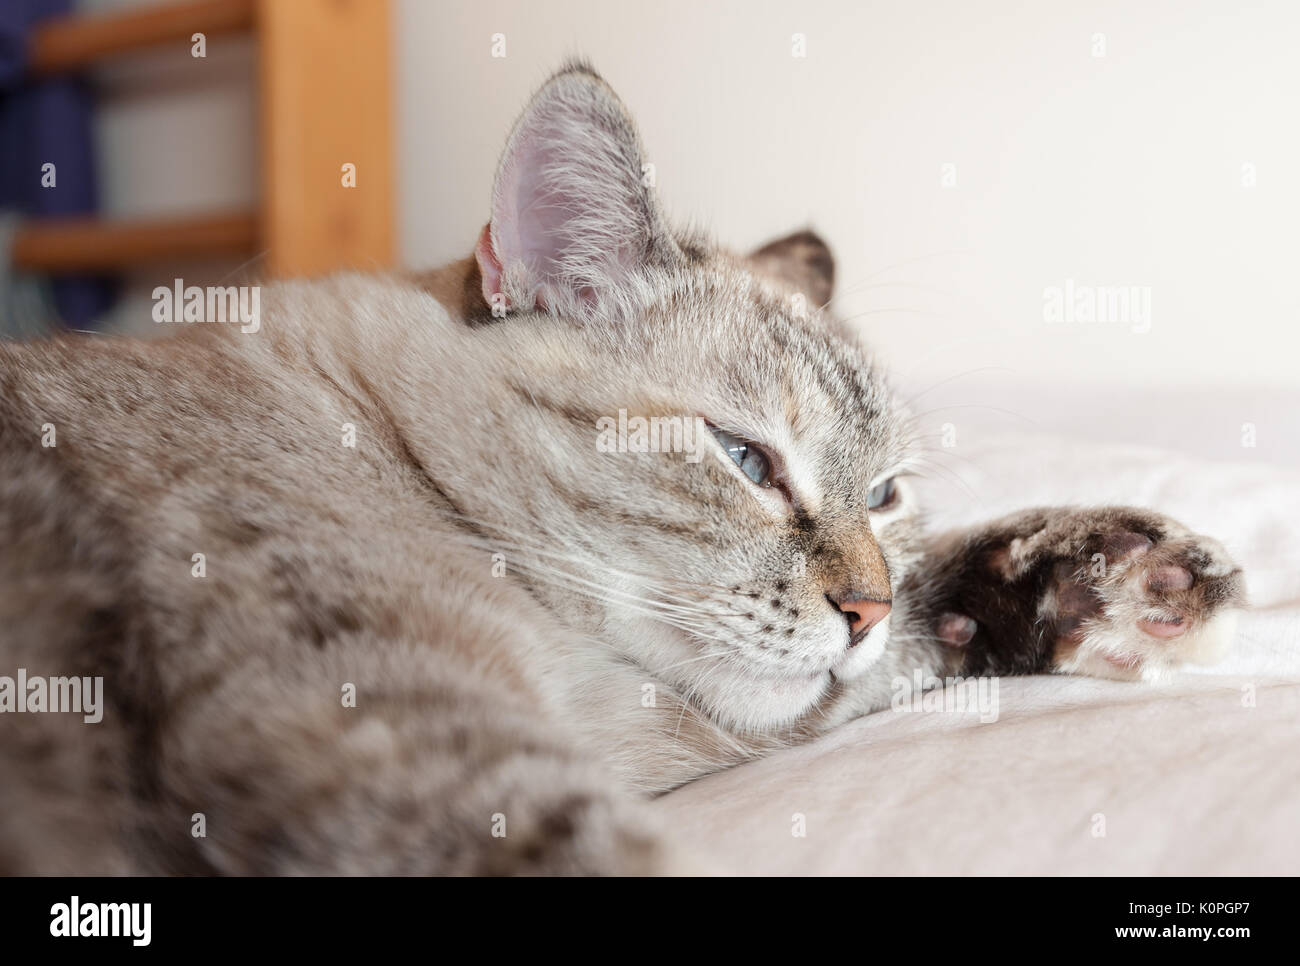 Portrait of tabby cat on brown plaid. European cat. Stock Photo